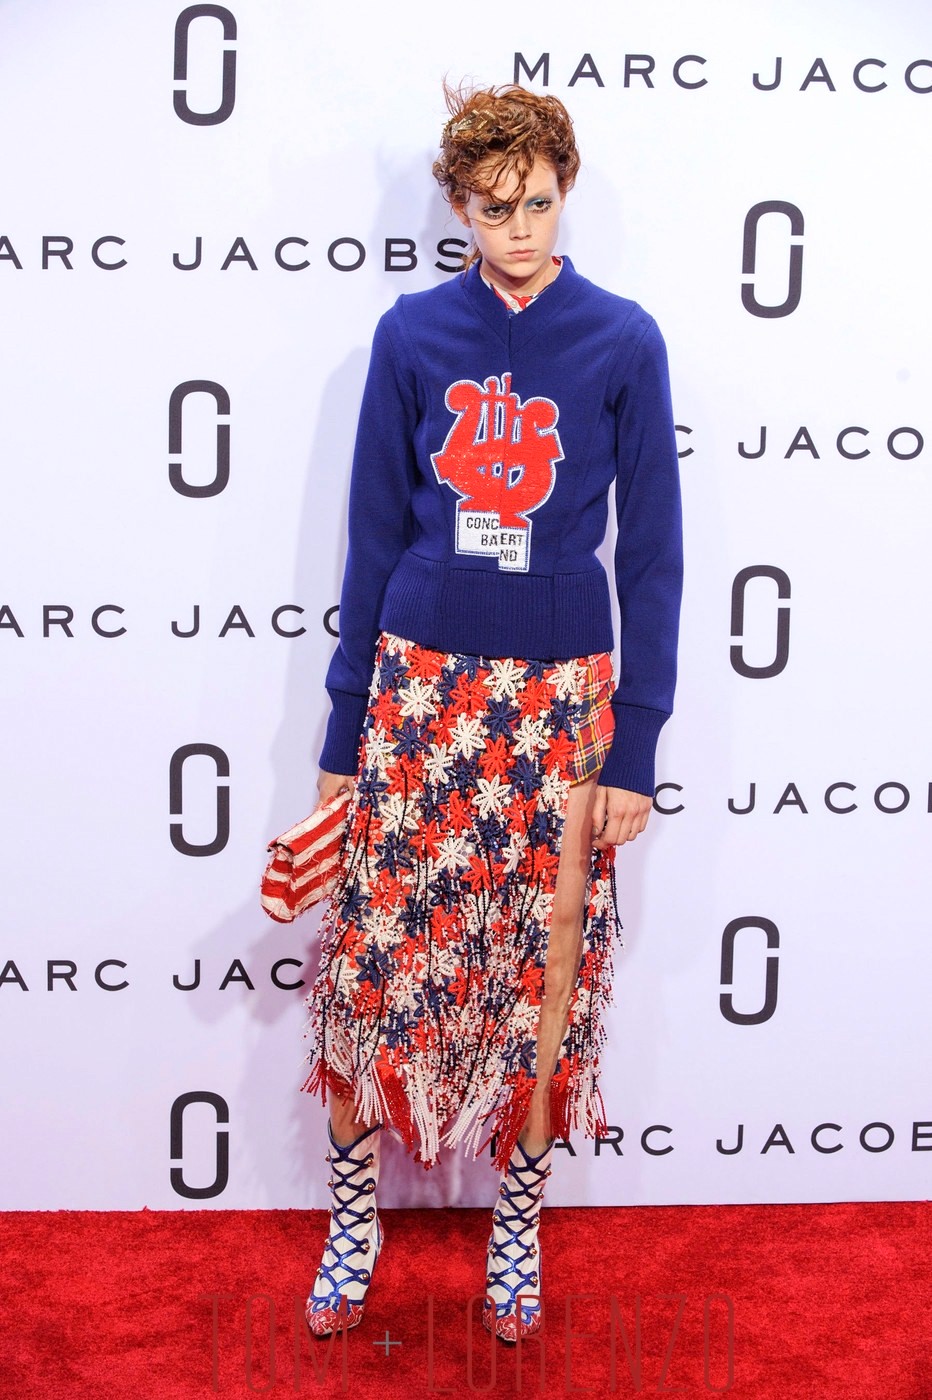 Marc-Jacobs-Spring-2106-Collection-Runway-NYFW-Tom-Lorenzo-SIte-TLO (1)